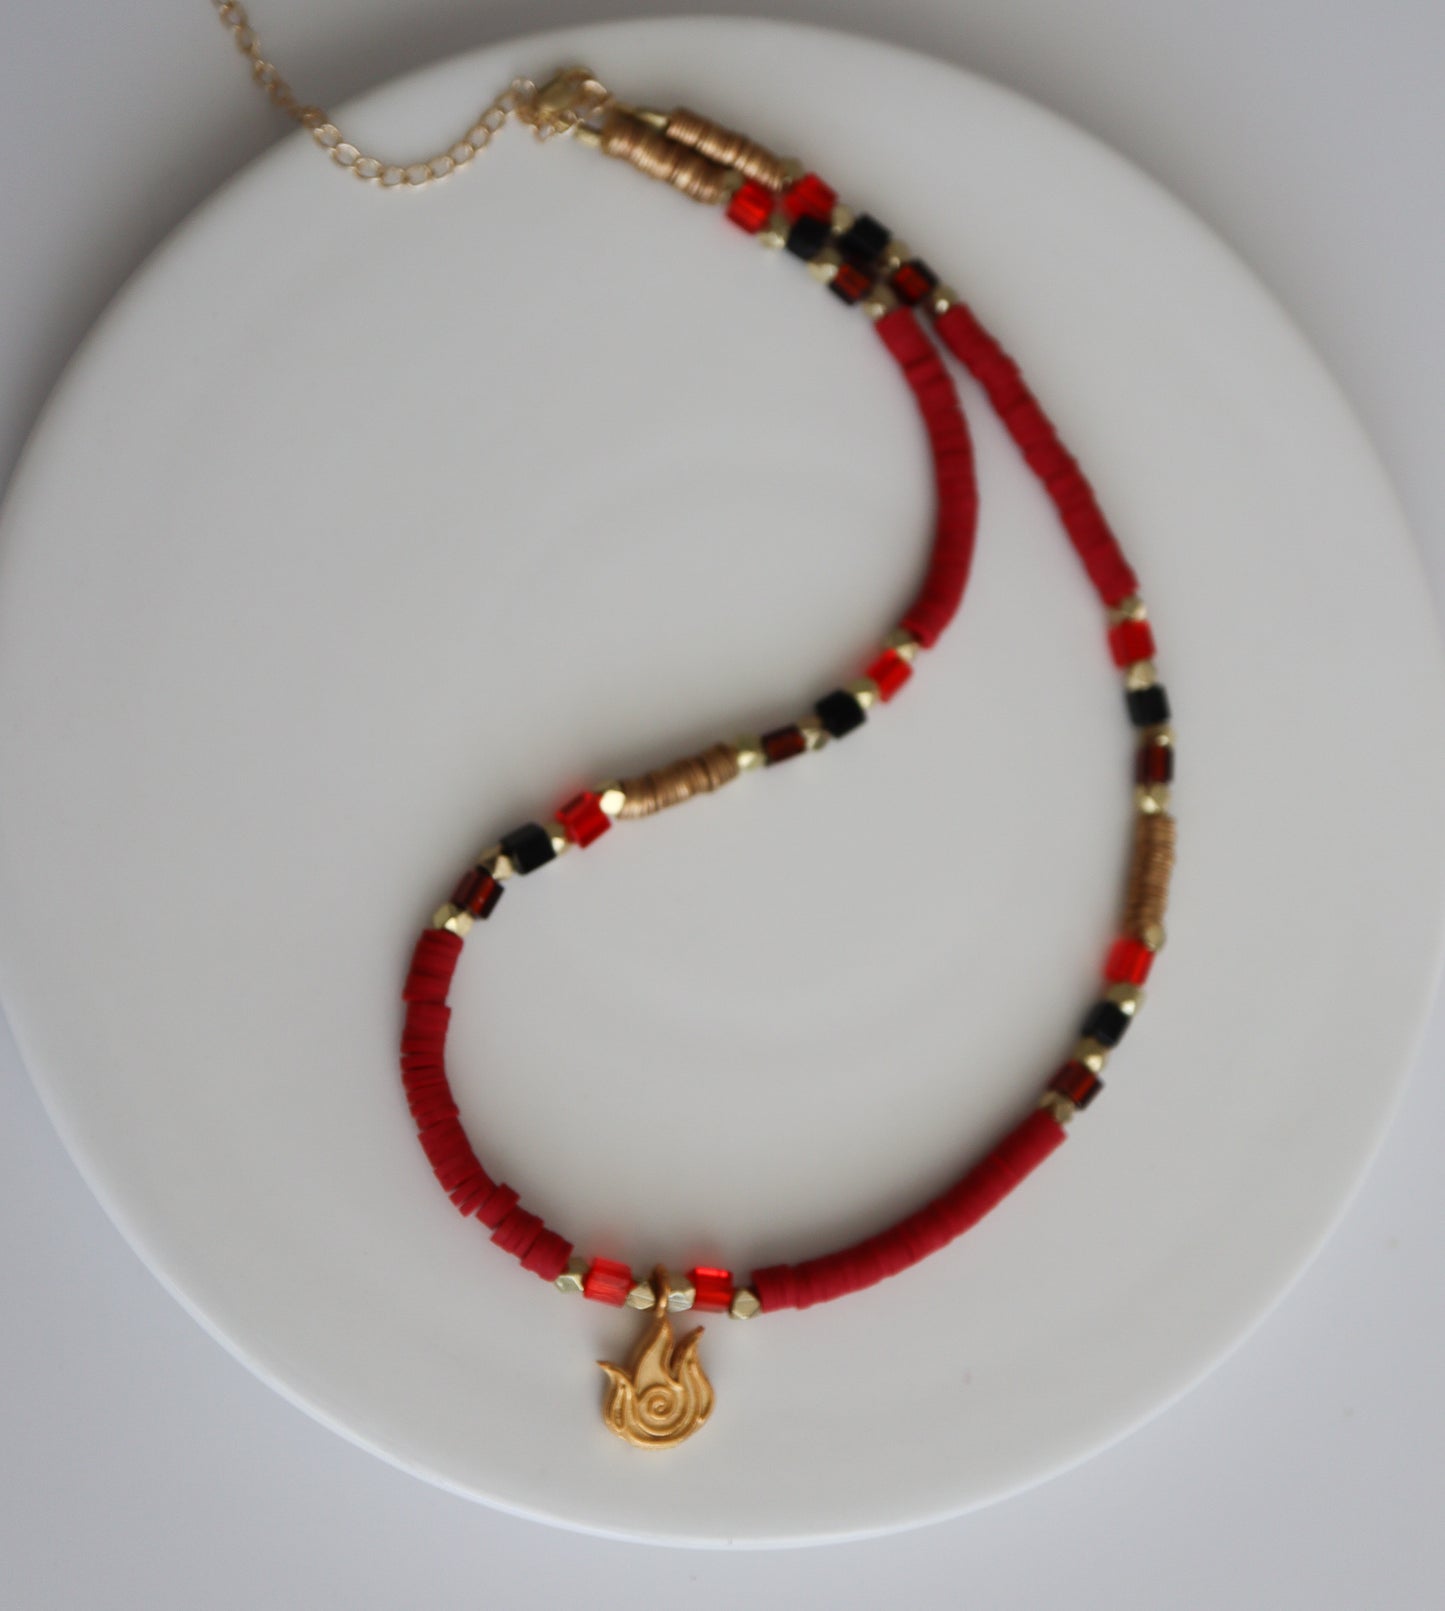 Fire necklace